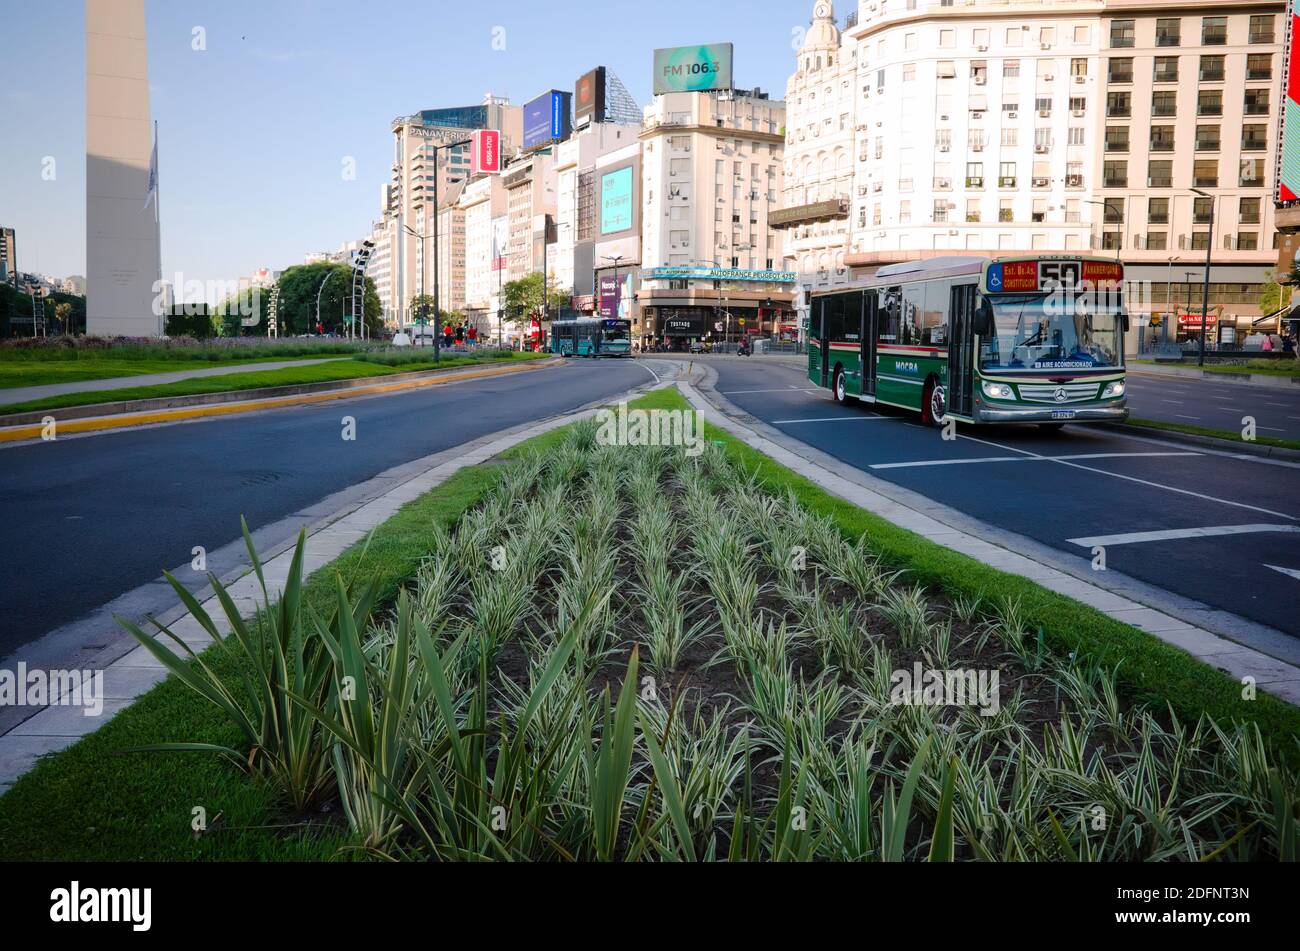 Buenos Aires, Argentina - January, 2020: Bus route 59 driving near Obelisco  de Buenos Aires - Obelisk of Buenos Aires - on world widest street Avenid  Stock Photo - Alamy